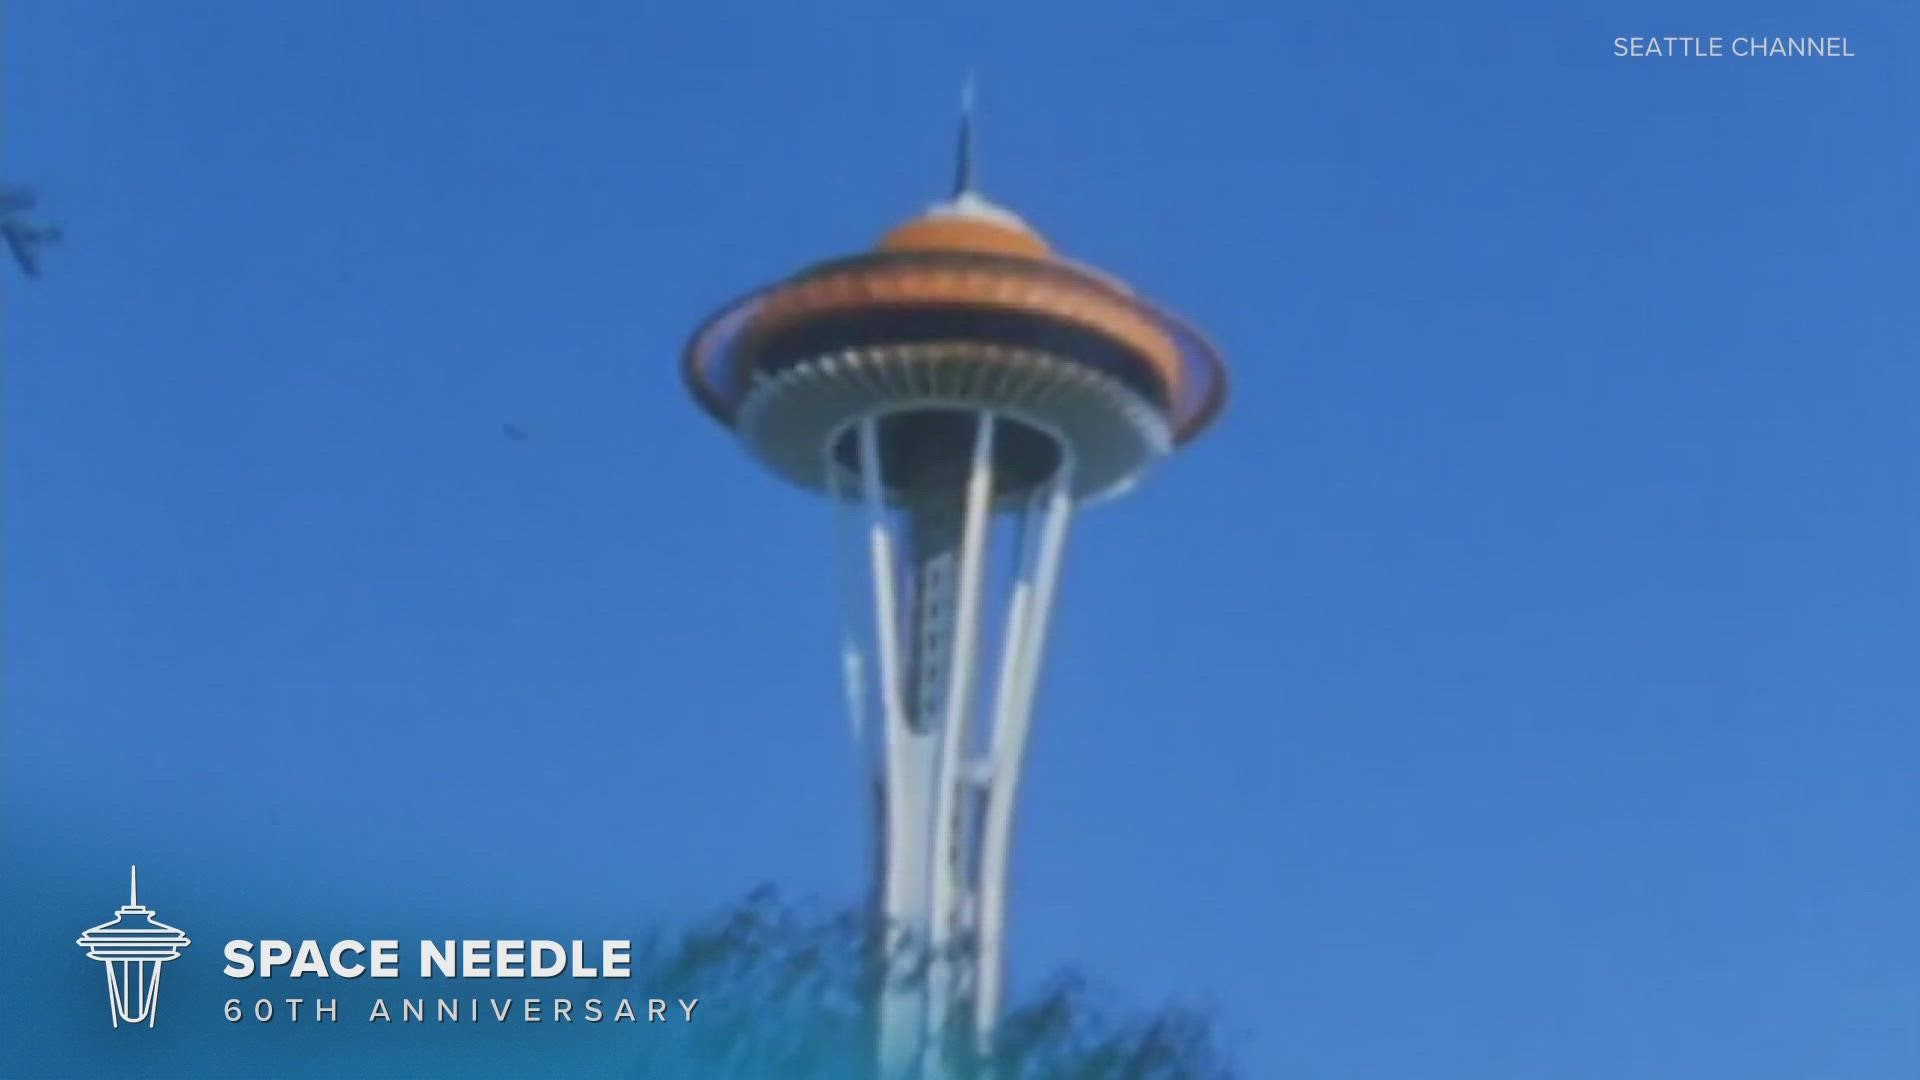 The Space Needle, which makes its debut at the 1962 World's Fair, turns 60 this week